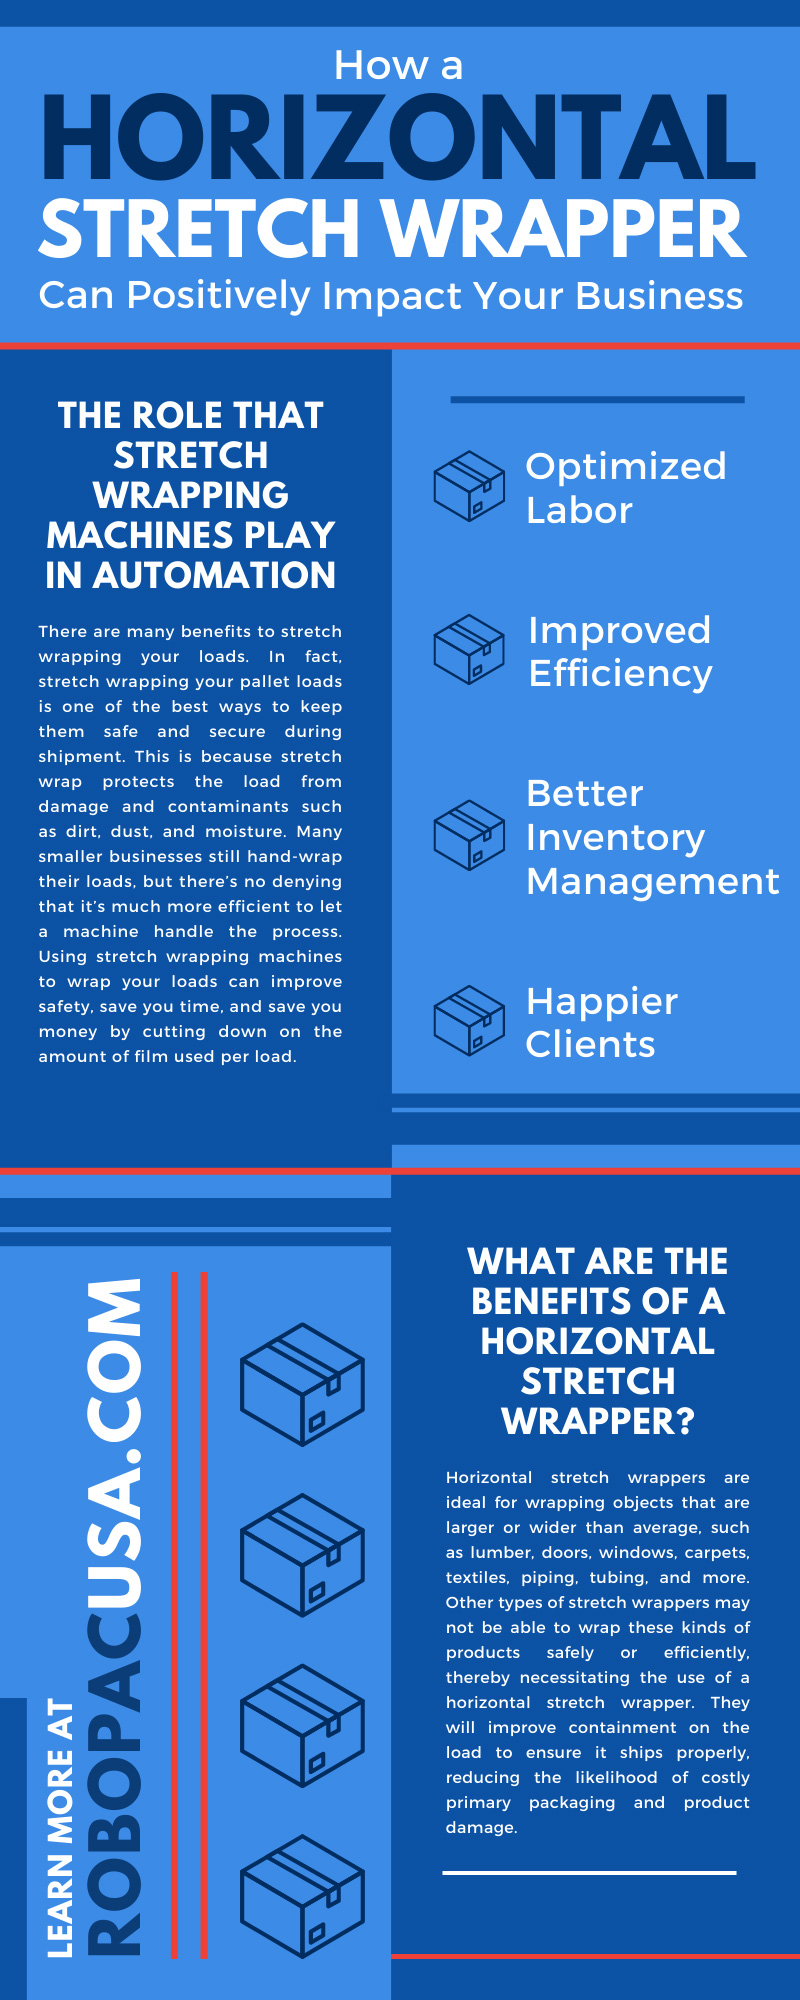 How a Horizontal Stretch Wrapper Can Positively Impact Your Business